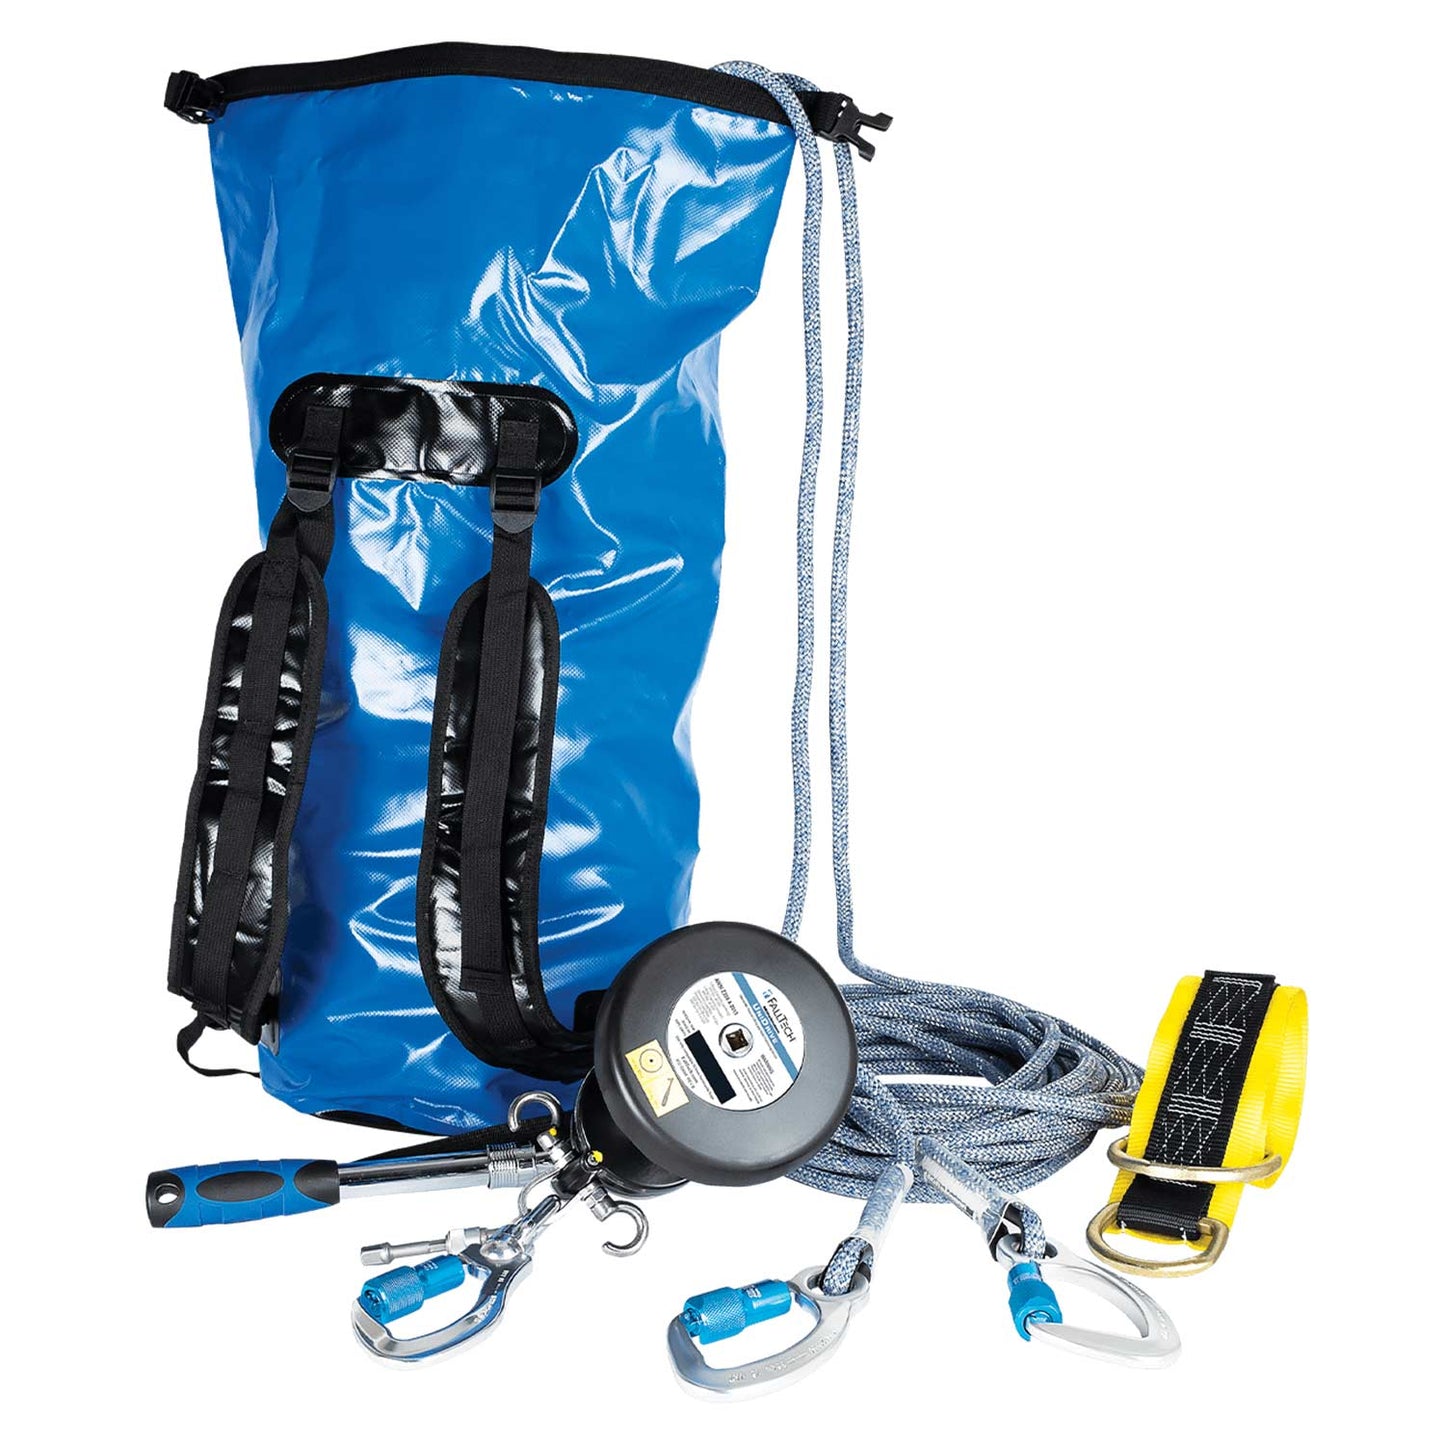 FallTech 500' Fall Protection Rescue Equipment Kit with Bag | 6814500K